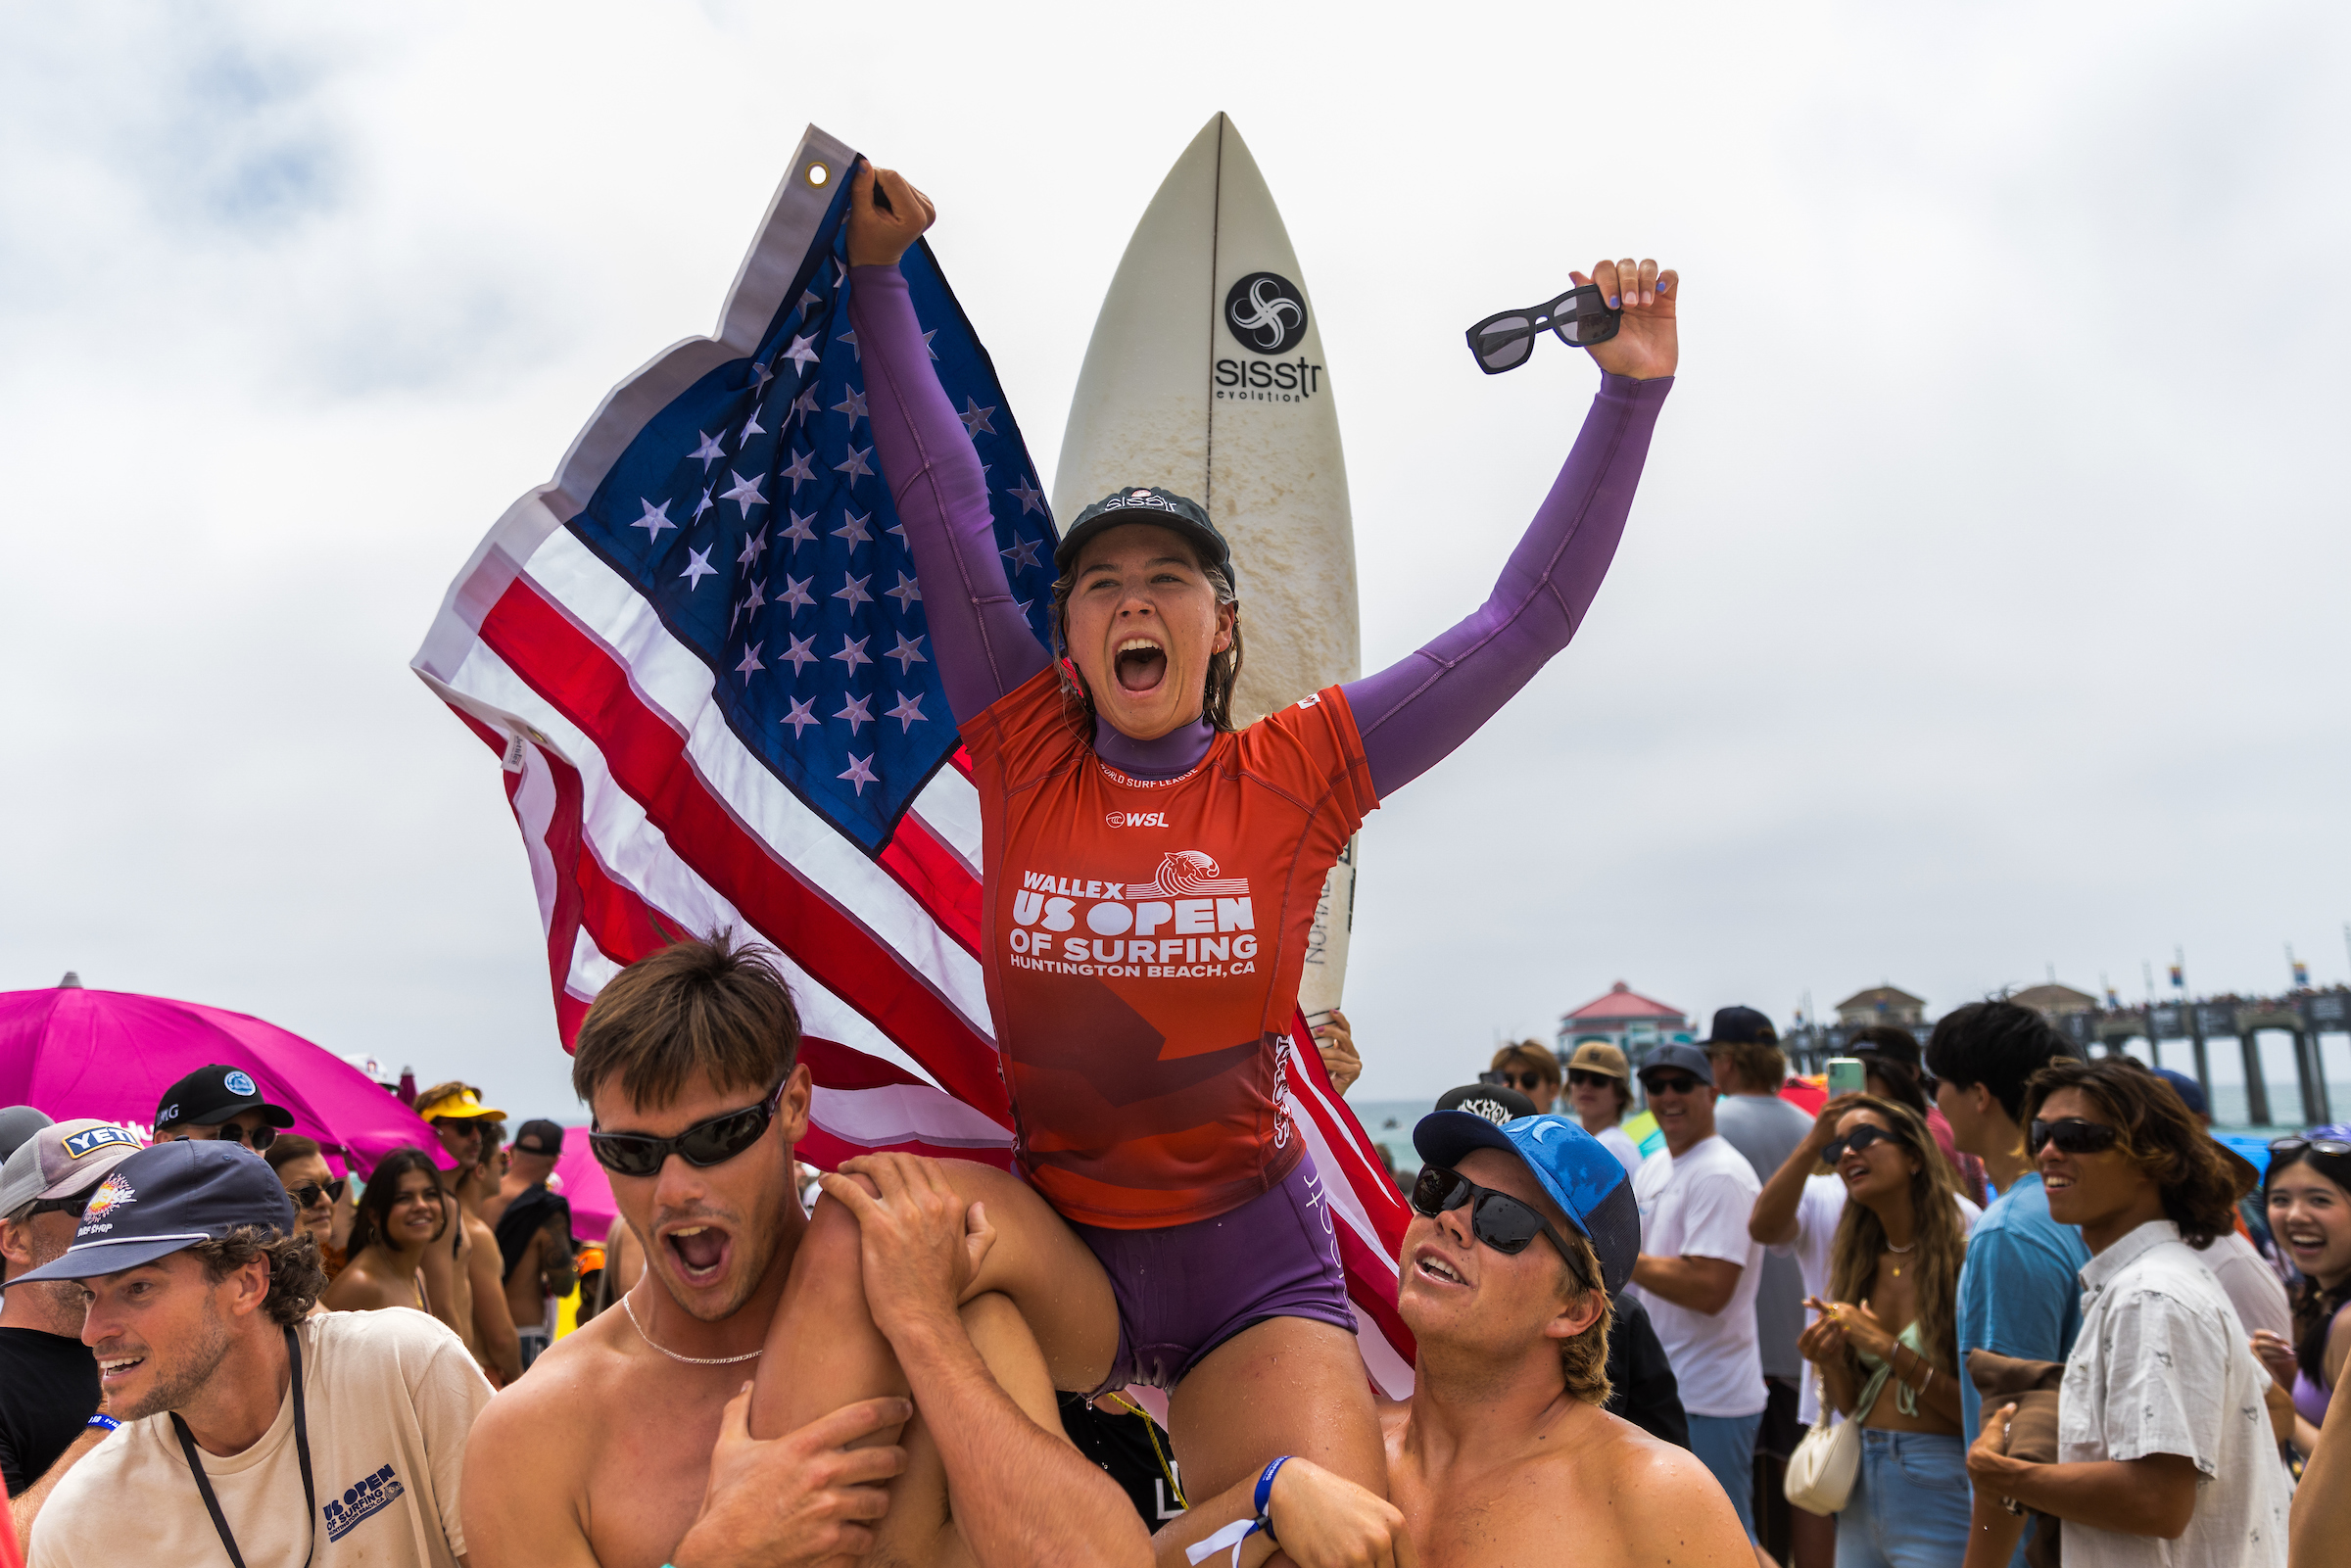 US Open of Surfing in Huntington Beach